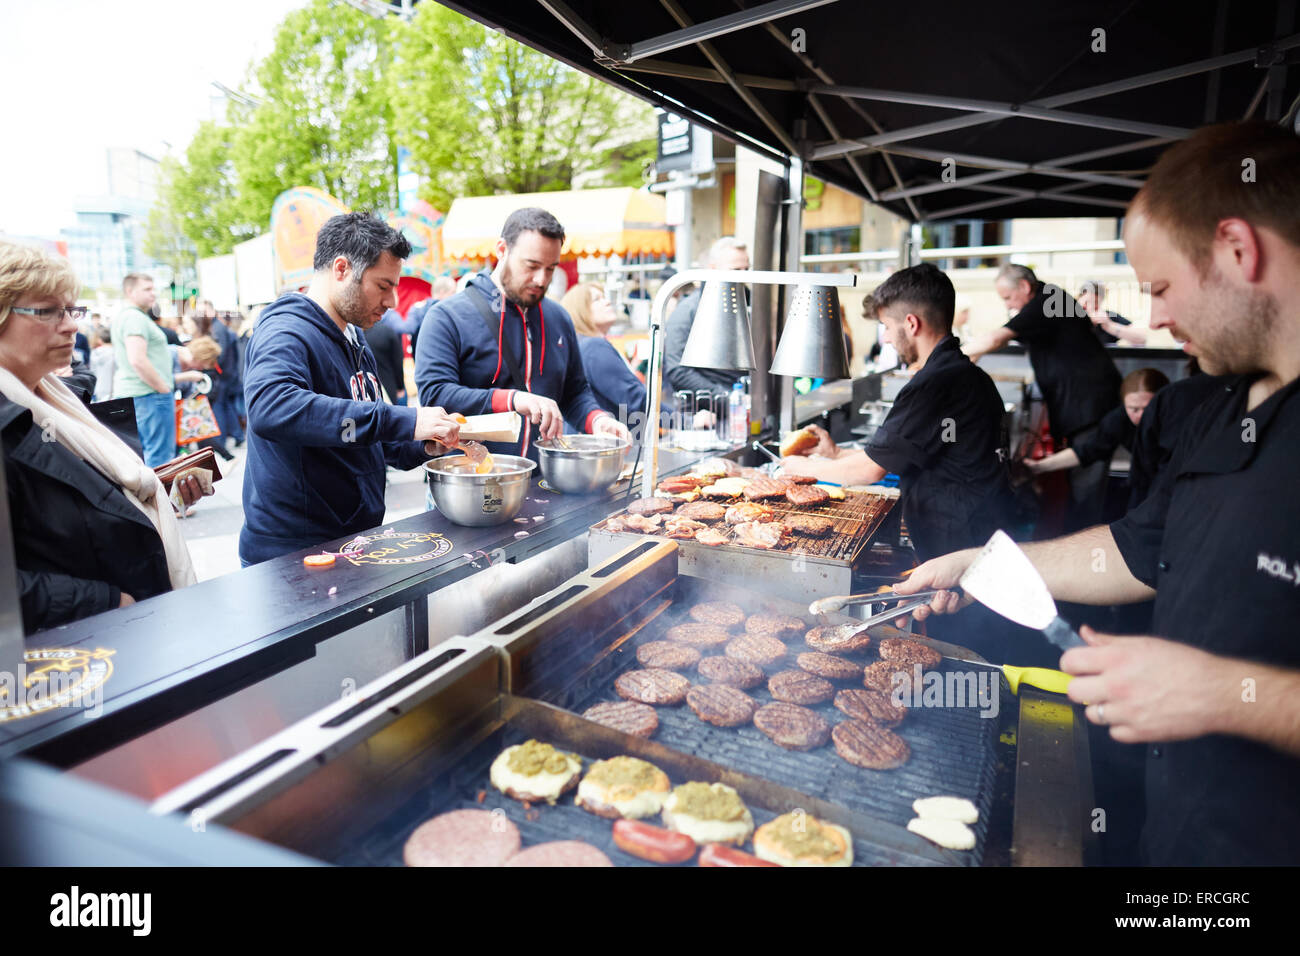 Salford Quays the Lowry Outlet Food Festival a burger stall selling gourmet burgers     UK Great Britain British United Kingdom Stock Photo